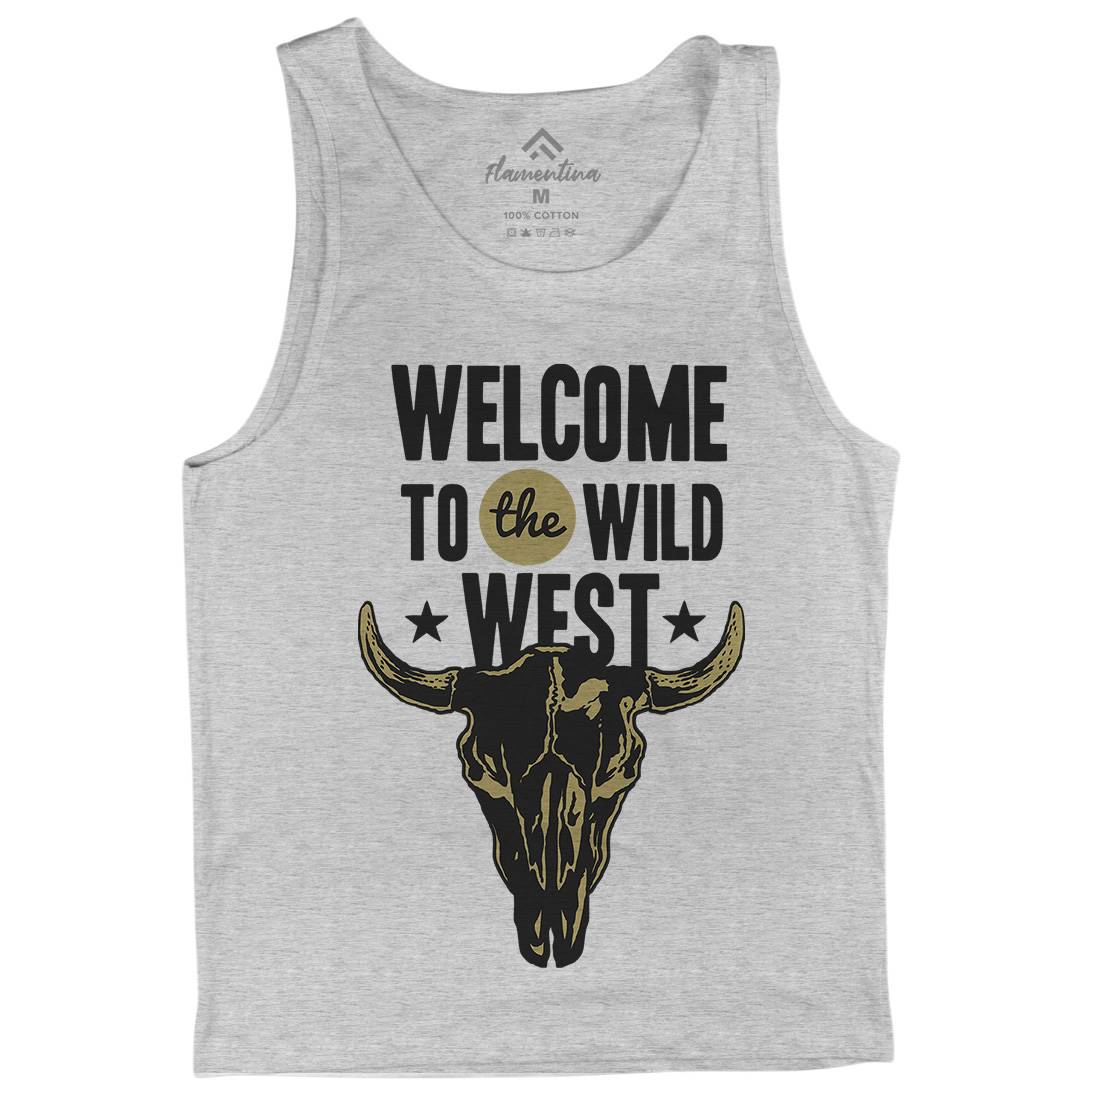 Welcome To The Wild West Mens Tank Top Vest American A393